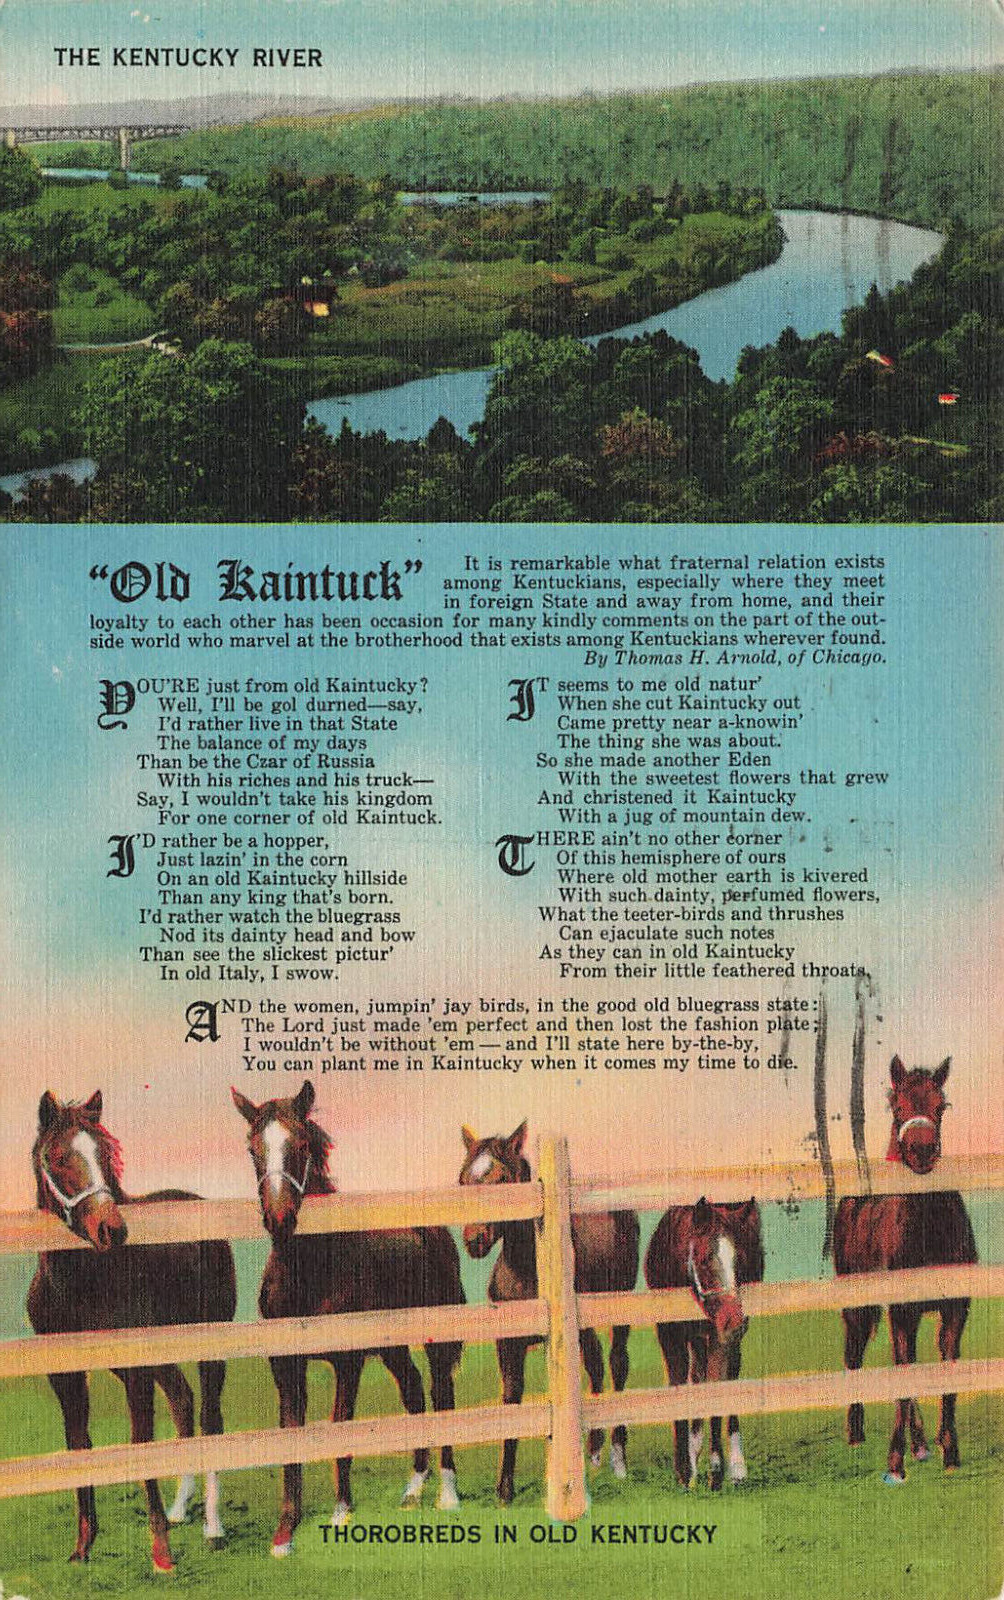 KY RIVER & THOROBREDS WITH OLD KAINTUCK POEM POSTCARD KY KENTUCKY 1940s